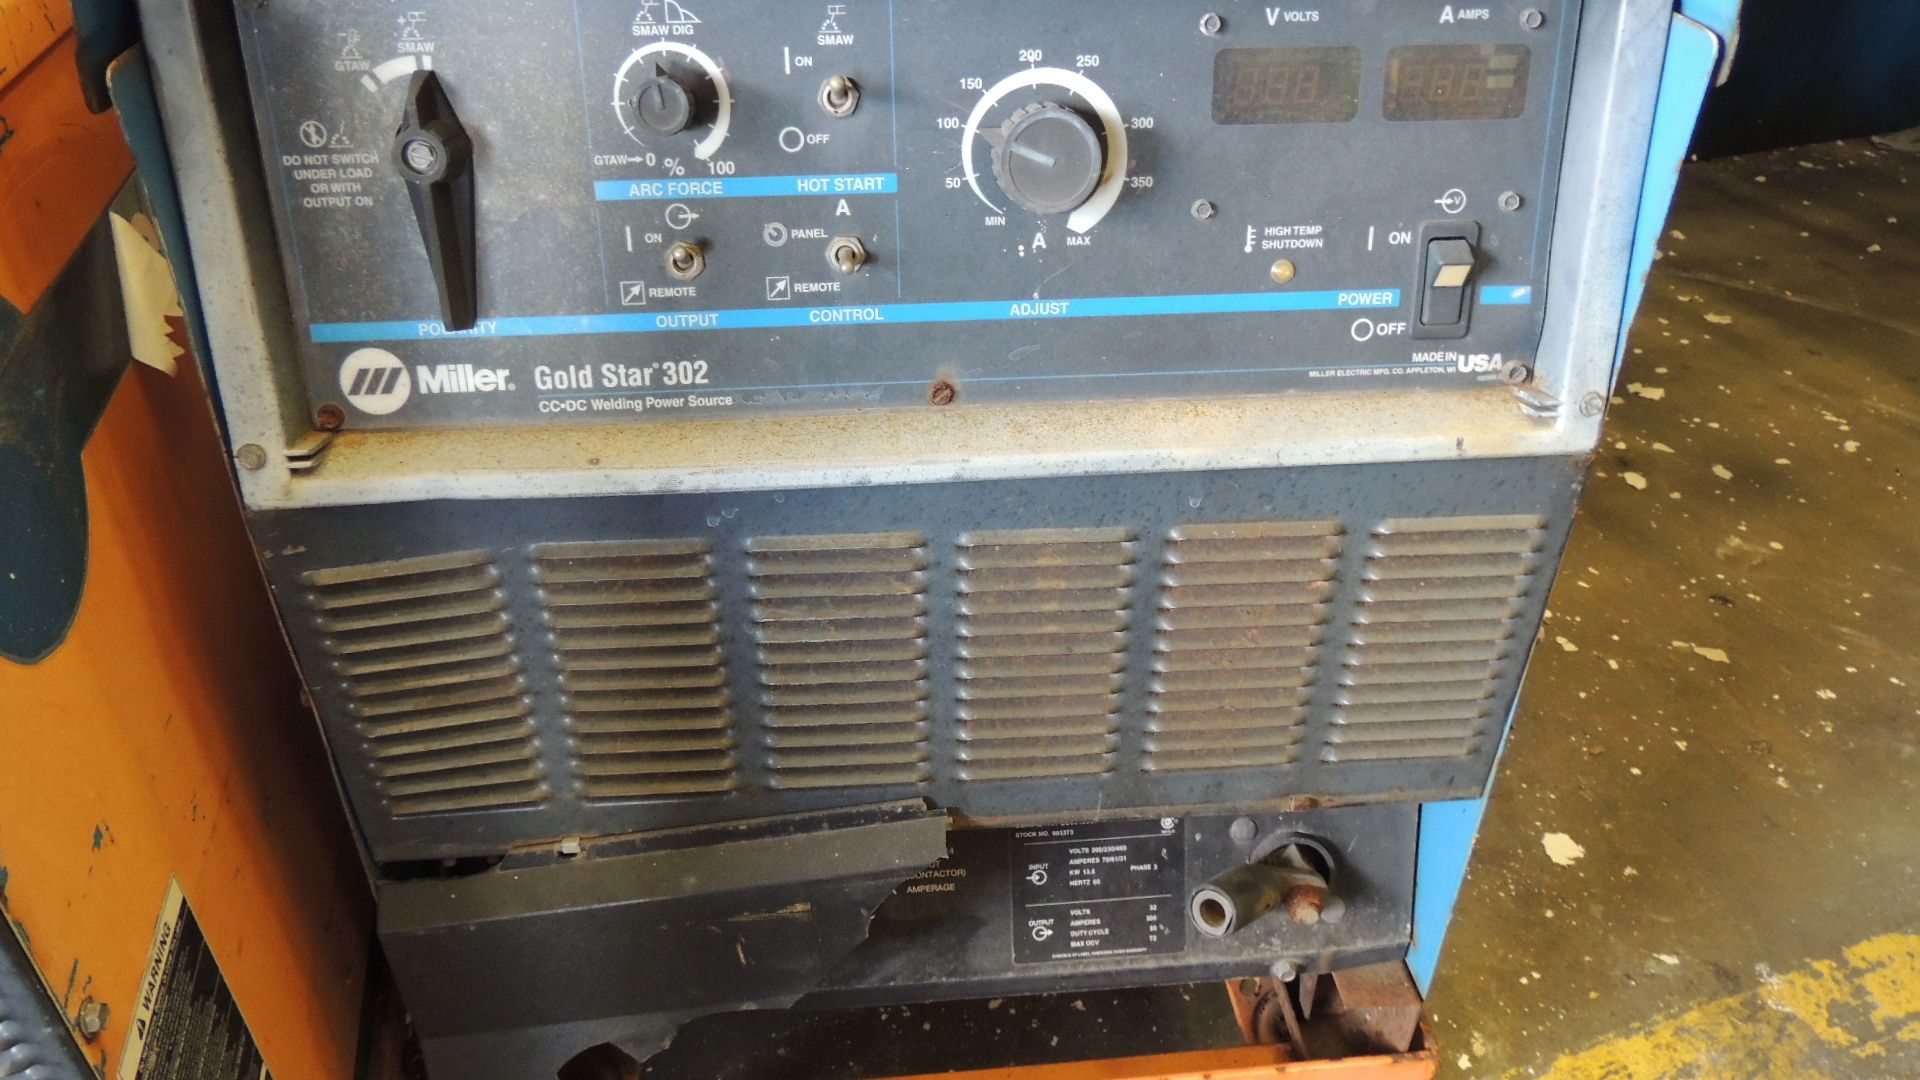 Welder. Miller Gold Star 302 CC.DC welding power source, on casters, volts and amps digital readout, - Image 2 of 5